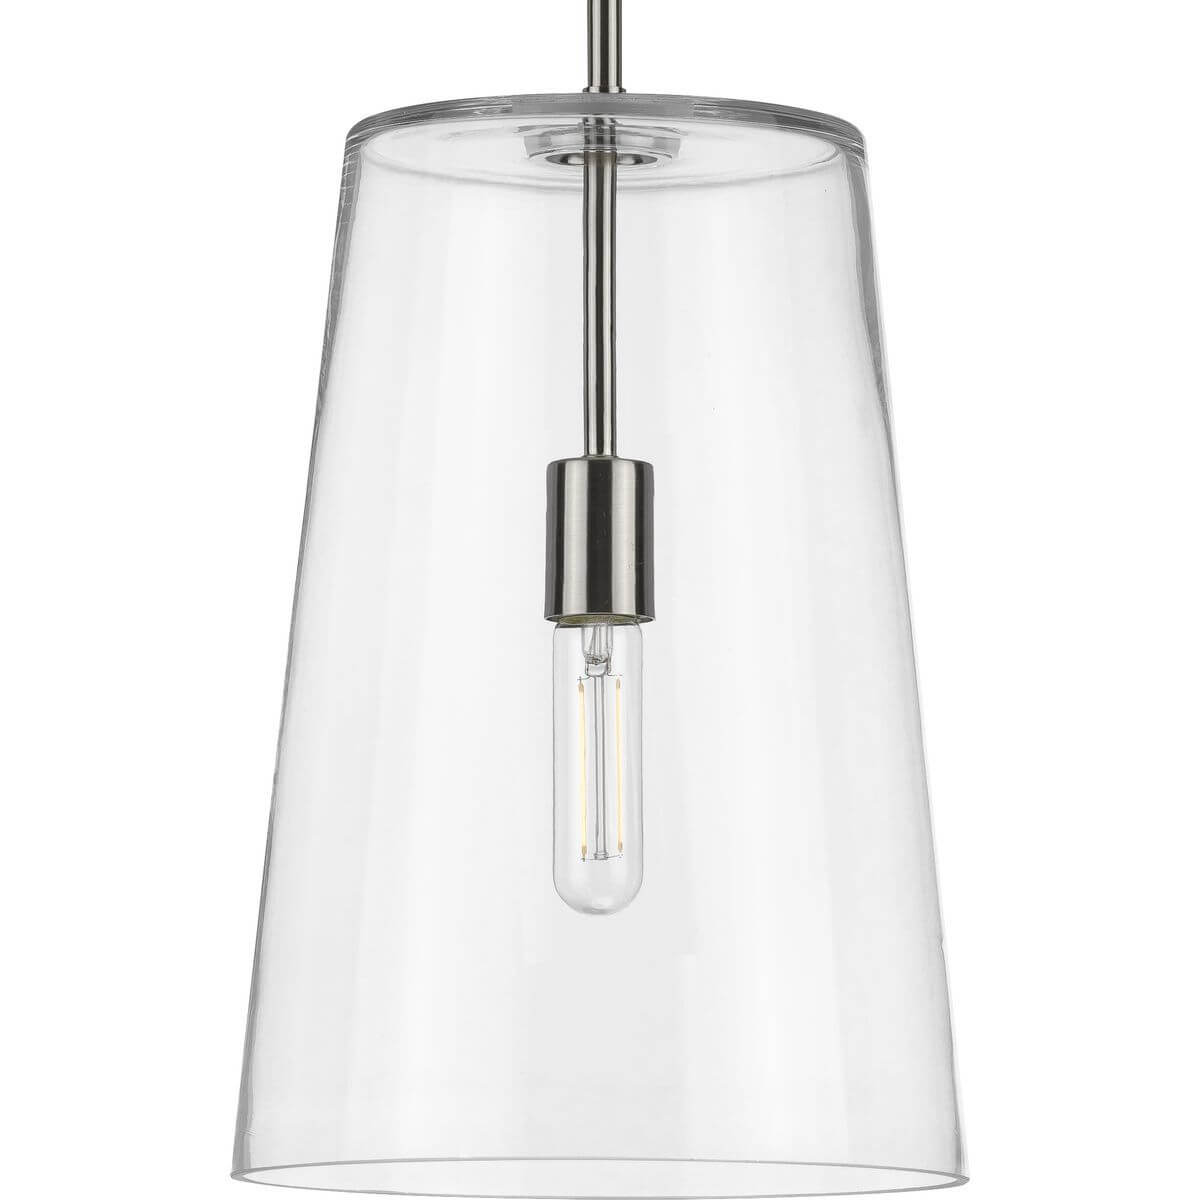 Progress Lighting Clarion 1 Light 11 inch Pendant in Brushed Nickel with Clear Glass P500242-009